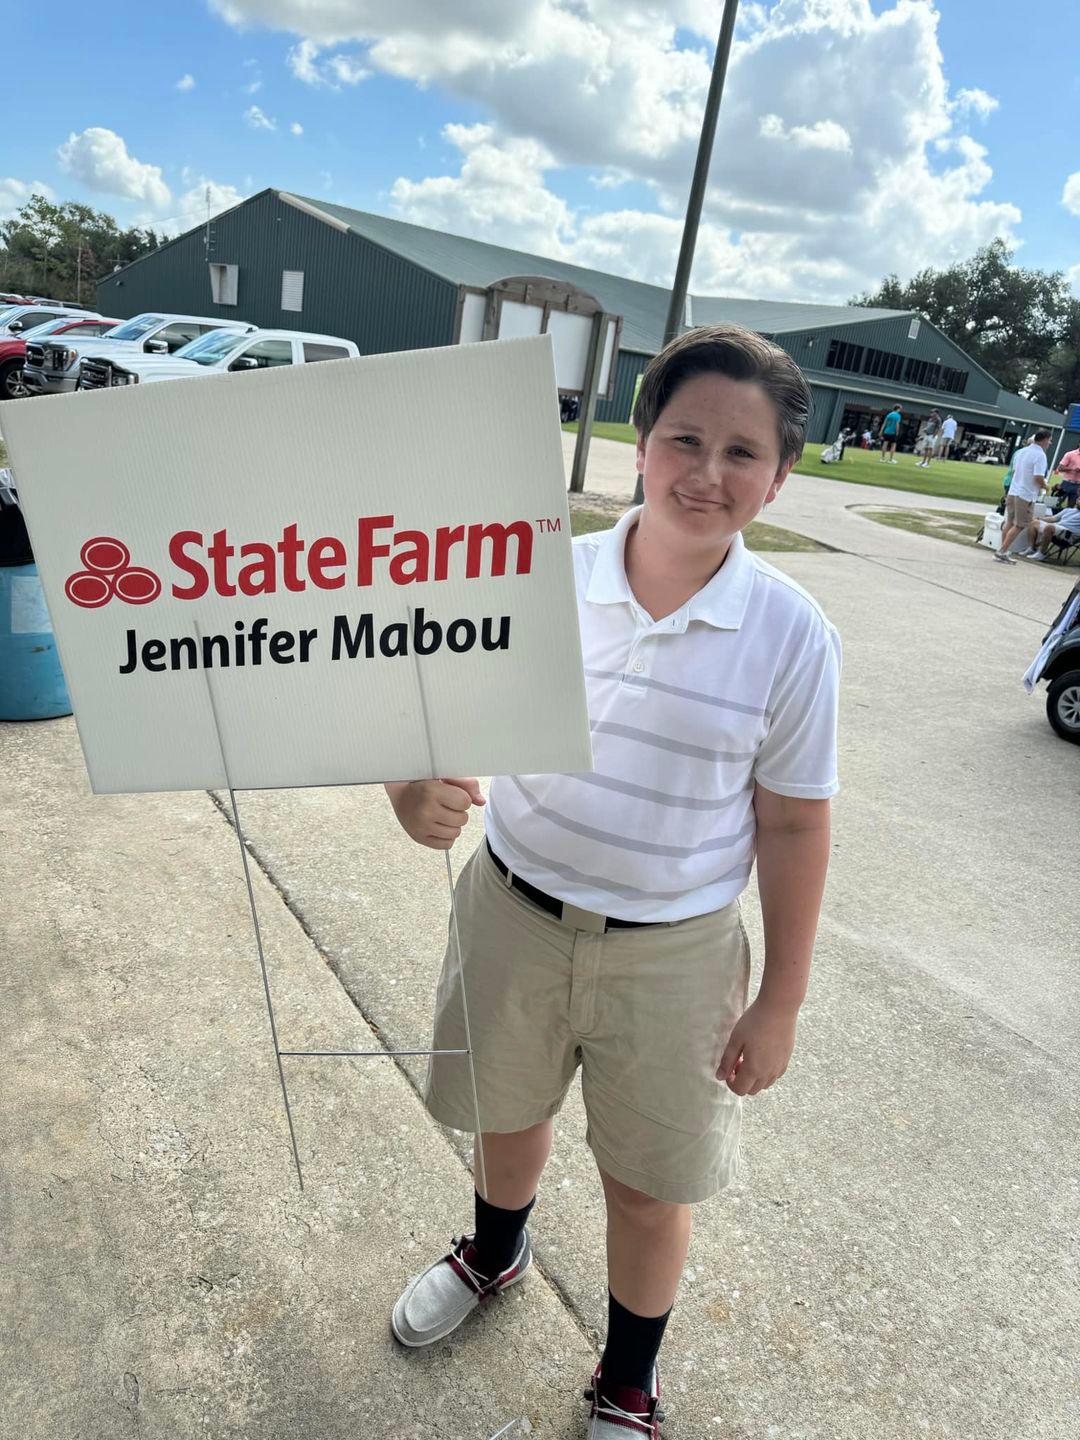 Proud to support the St. Theresa Catholic Church youth group golf fundraiser. Looks like a great tim Jennifer Mabou - State Farm Insurance Agent Sulphur (337)527-0027